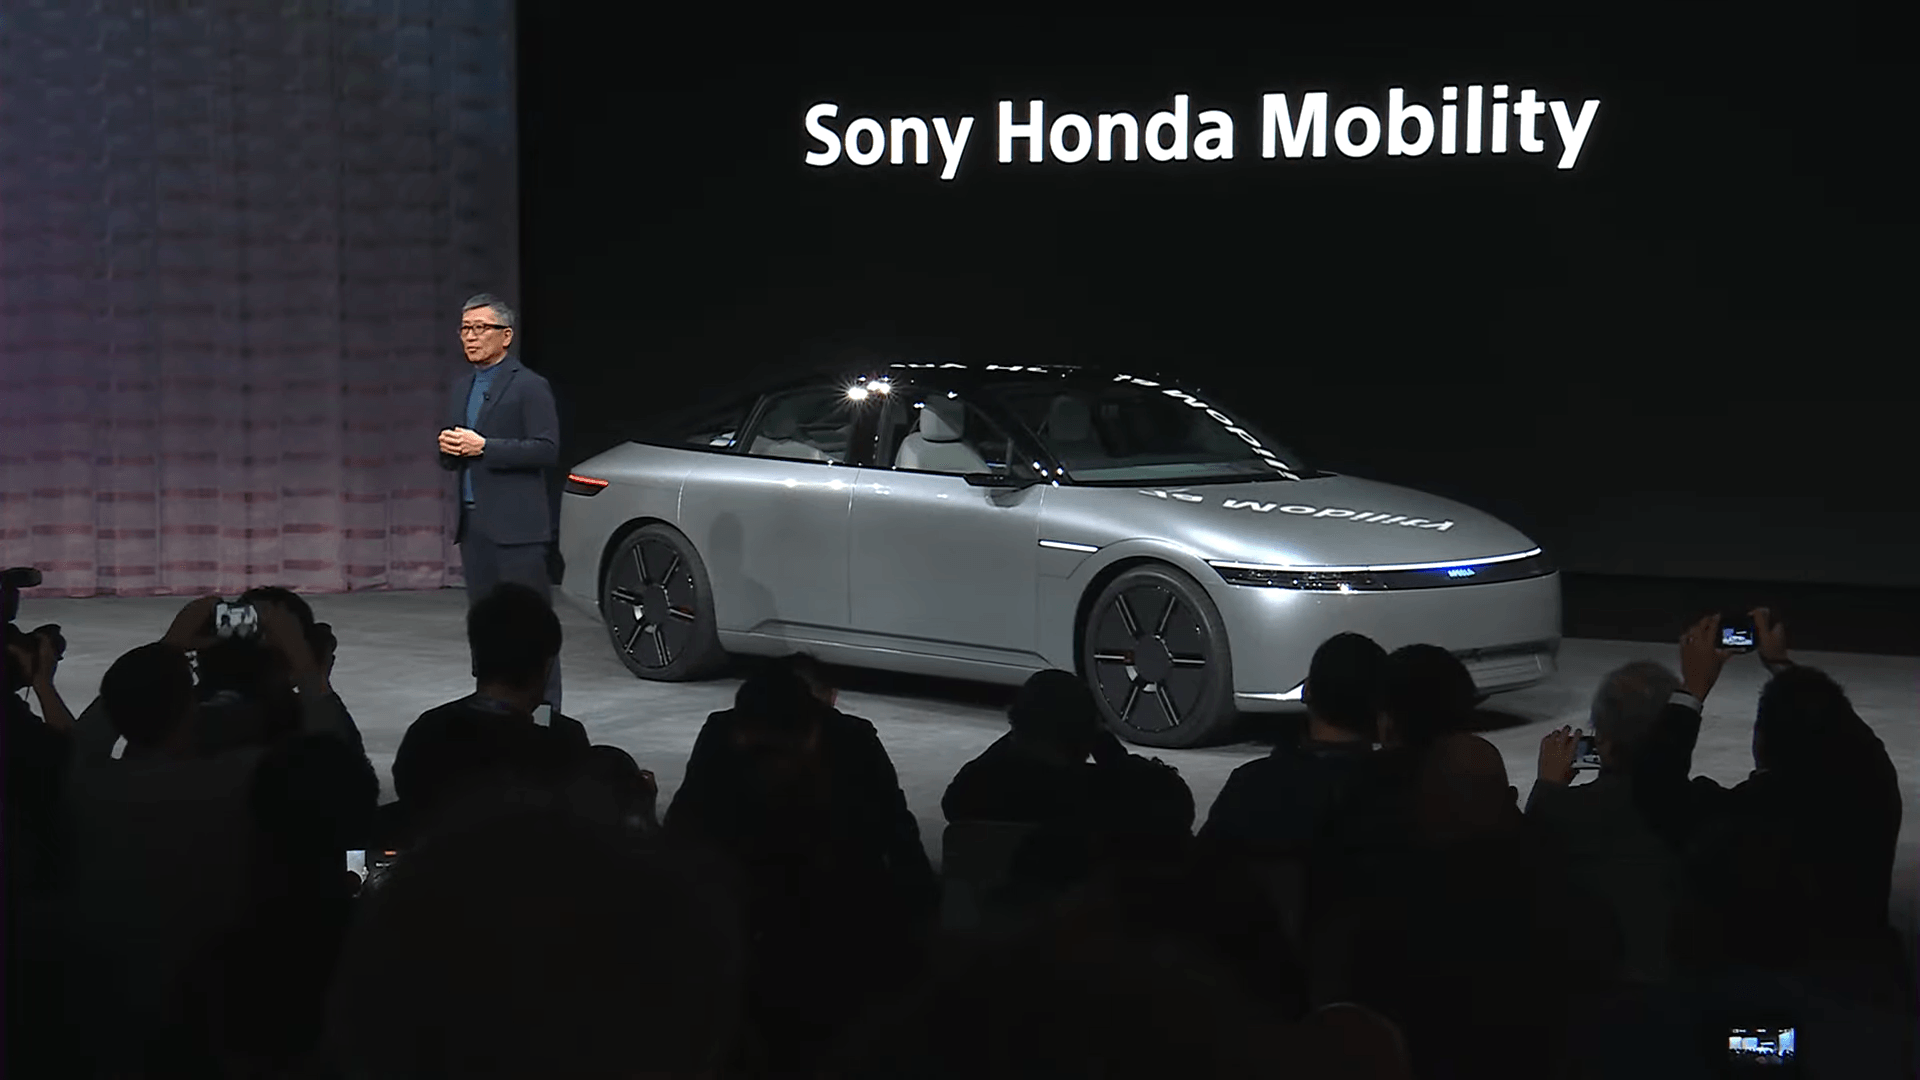 Sony Honda Mobility reveals its first electric vehicle, the Afeela